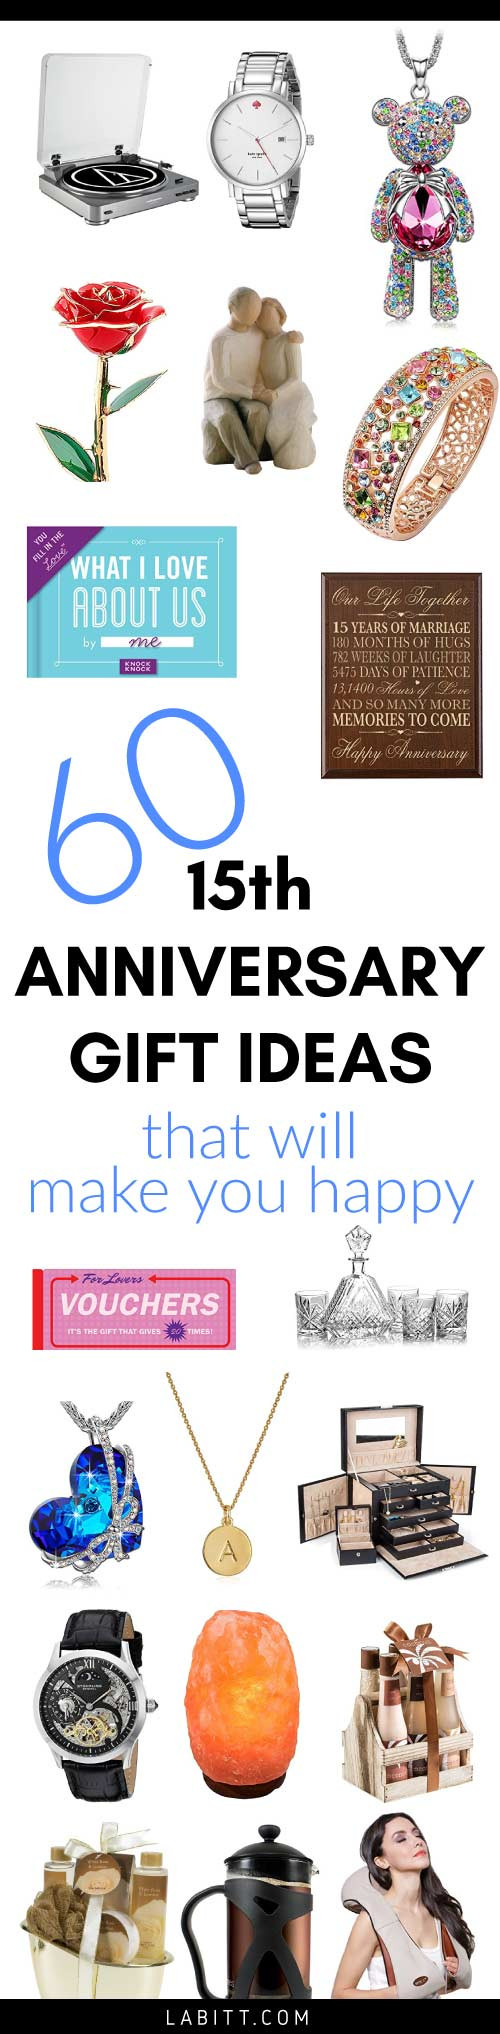 15Th Anniversary Gift Ideas For Him
 15th Wedding Anniversary Gift Ideas for Her